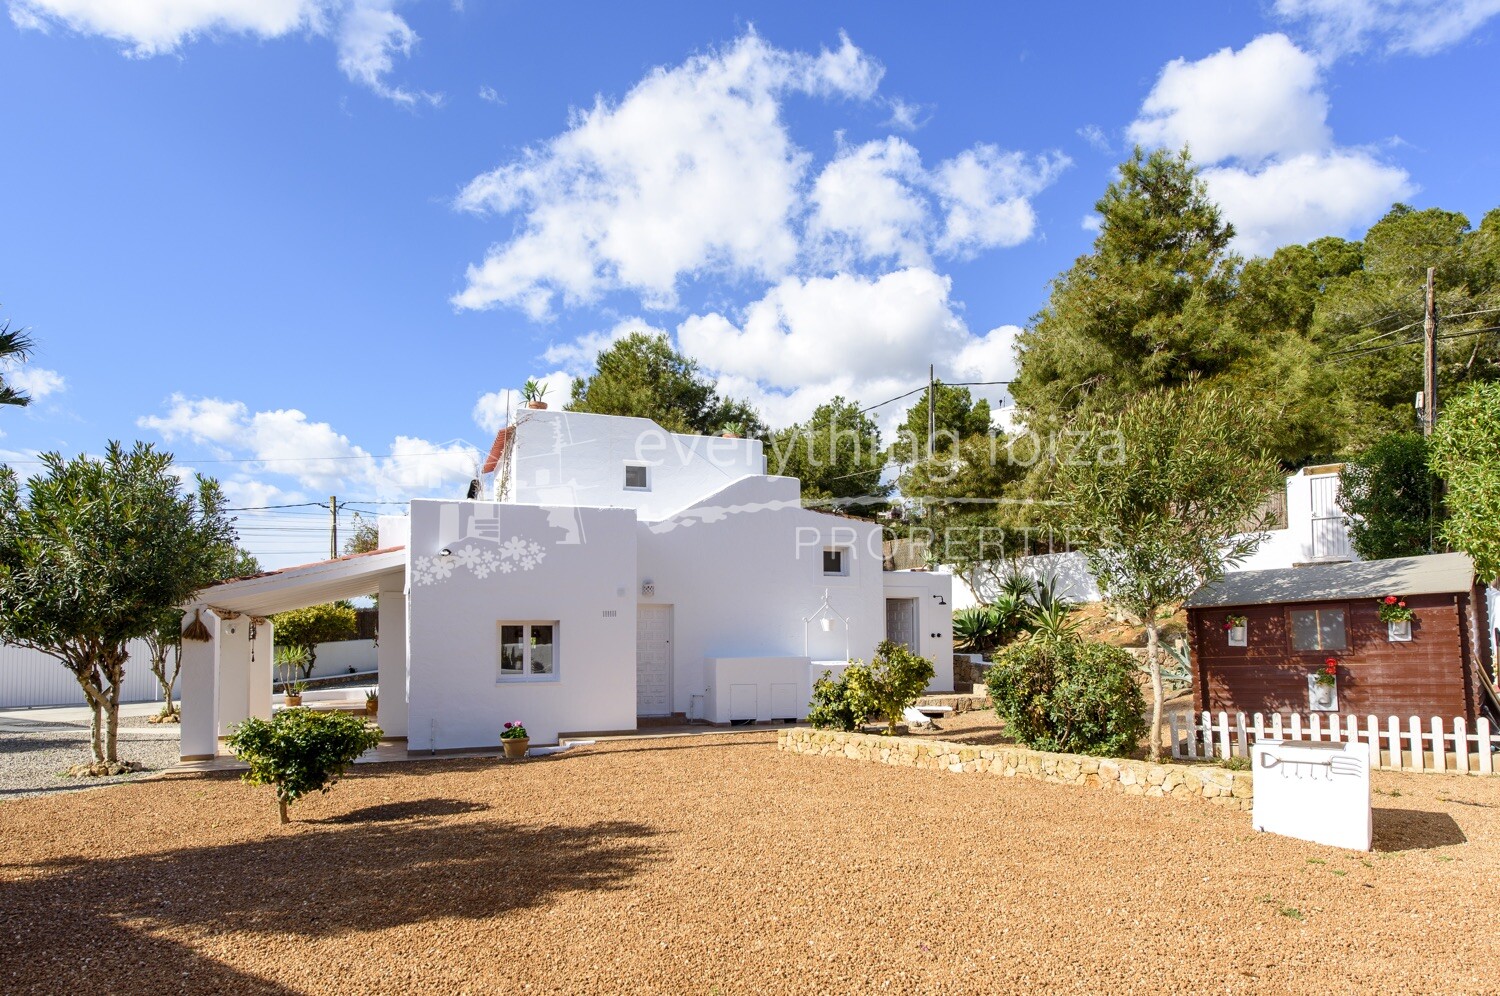 Charming Detached Villa in Lovely Las Salinas, ref. 1435, for sale in Ibiza by everything ibiza Properties